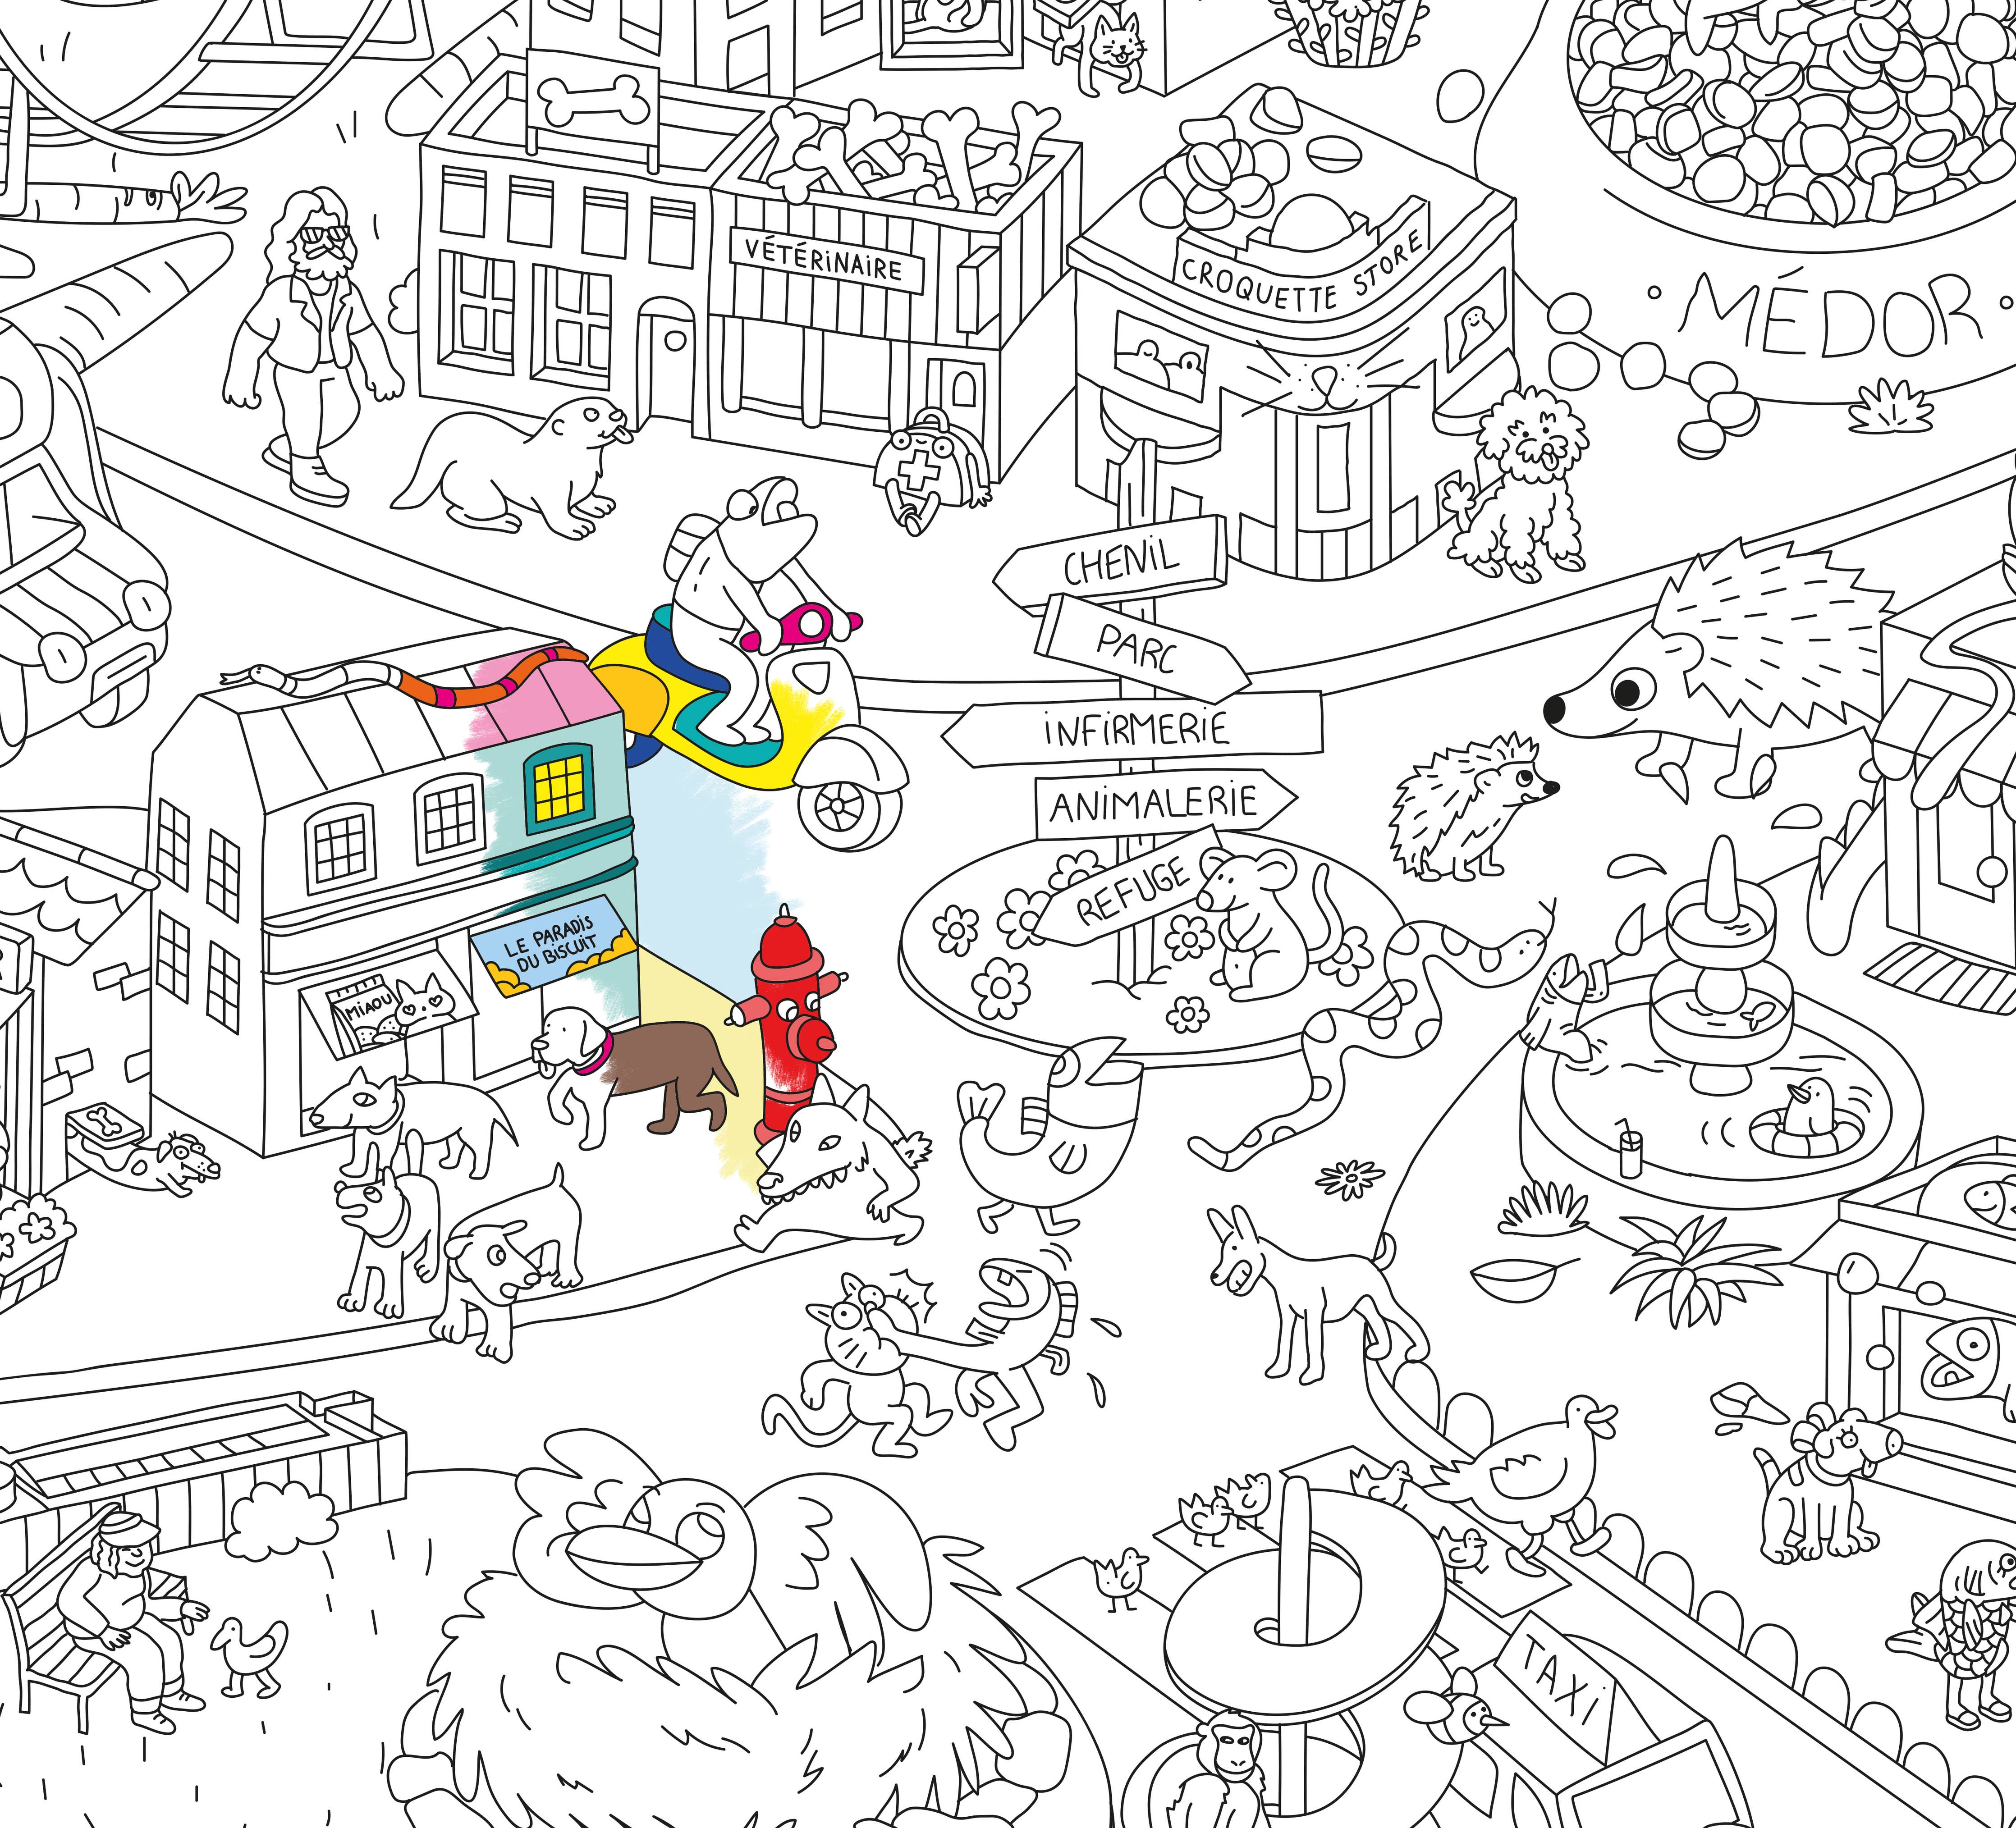 Animal Life Giant Coloring Poster